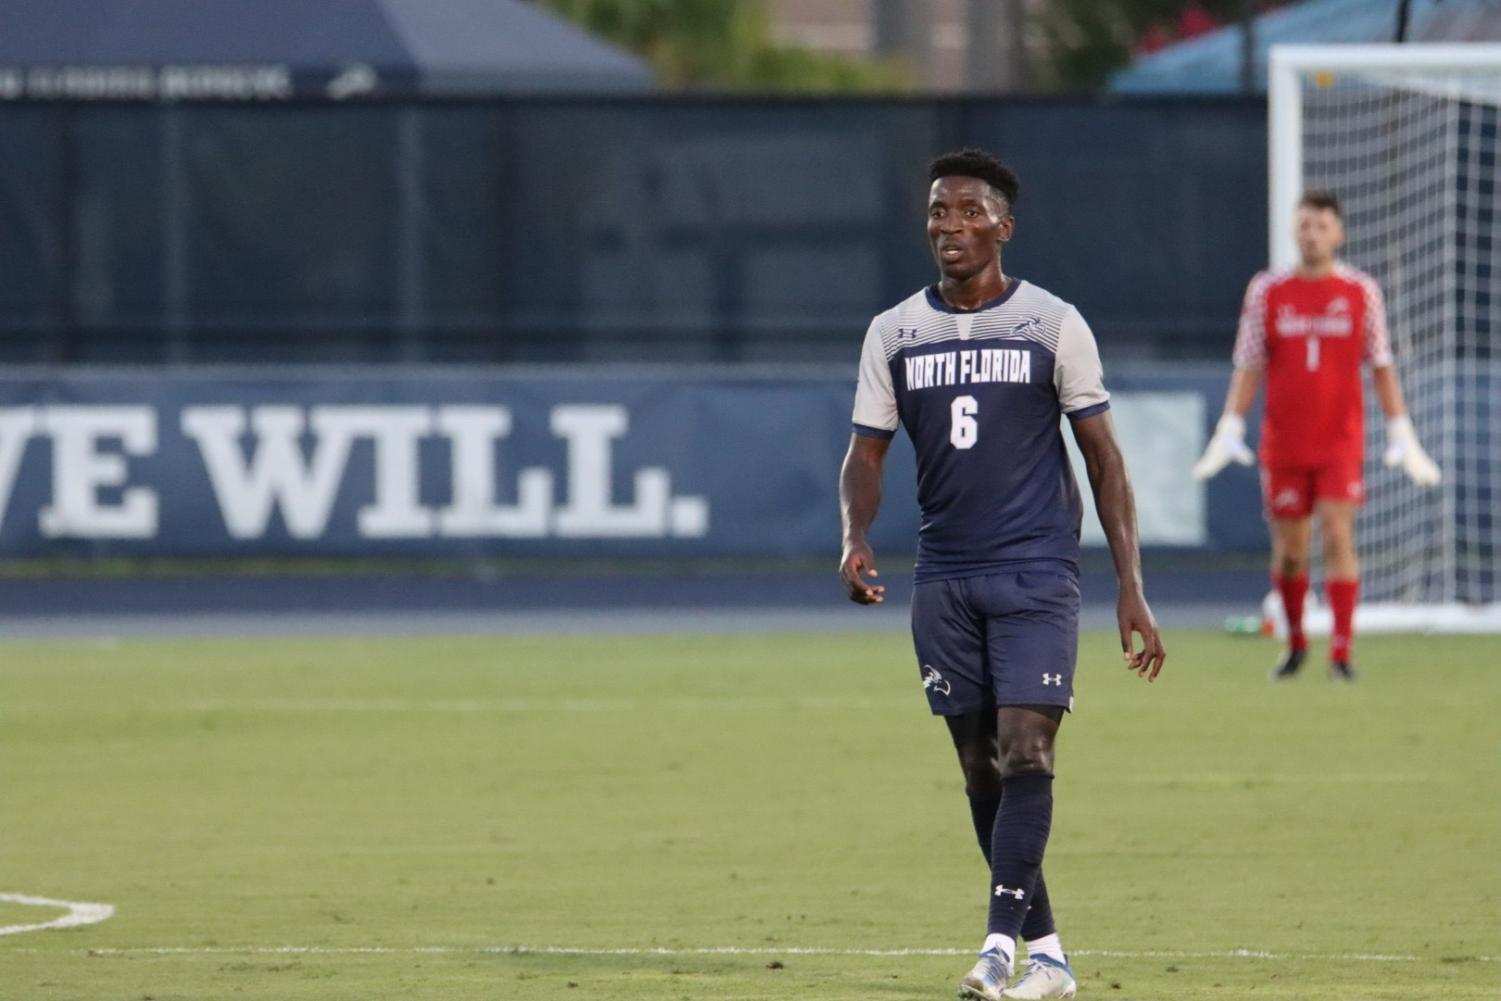 UNF player walks across the field, with goalkeeper in the background.